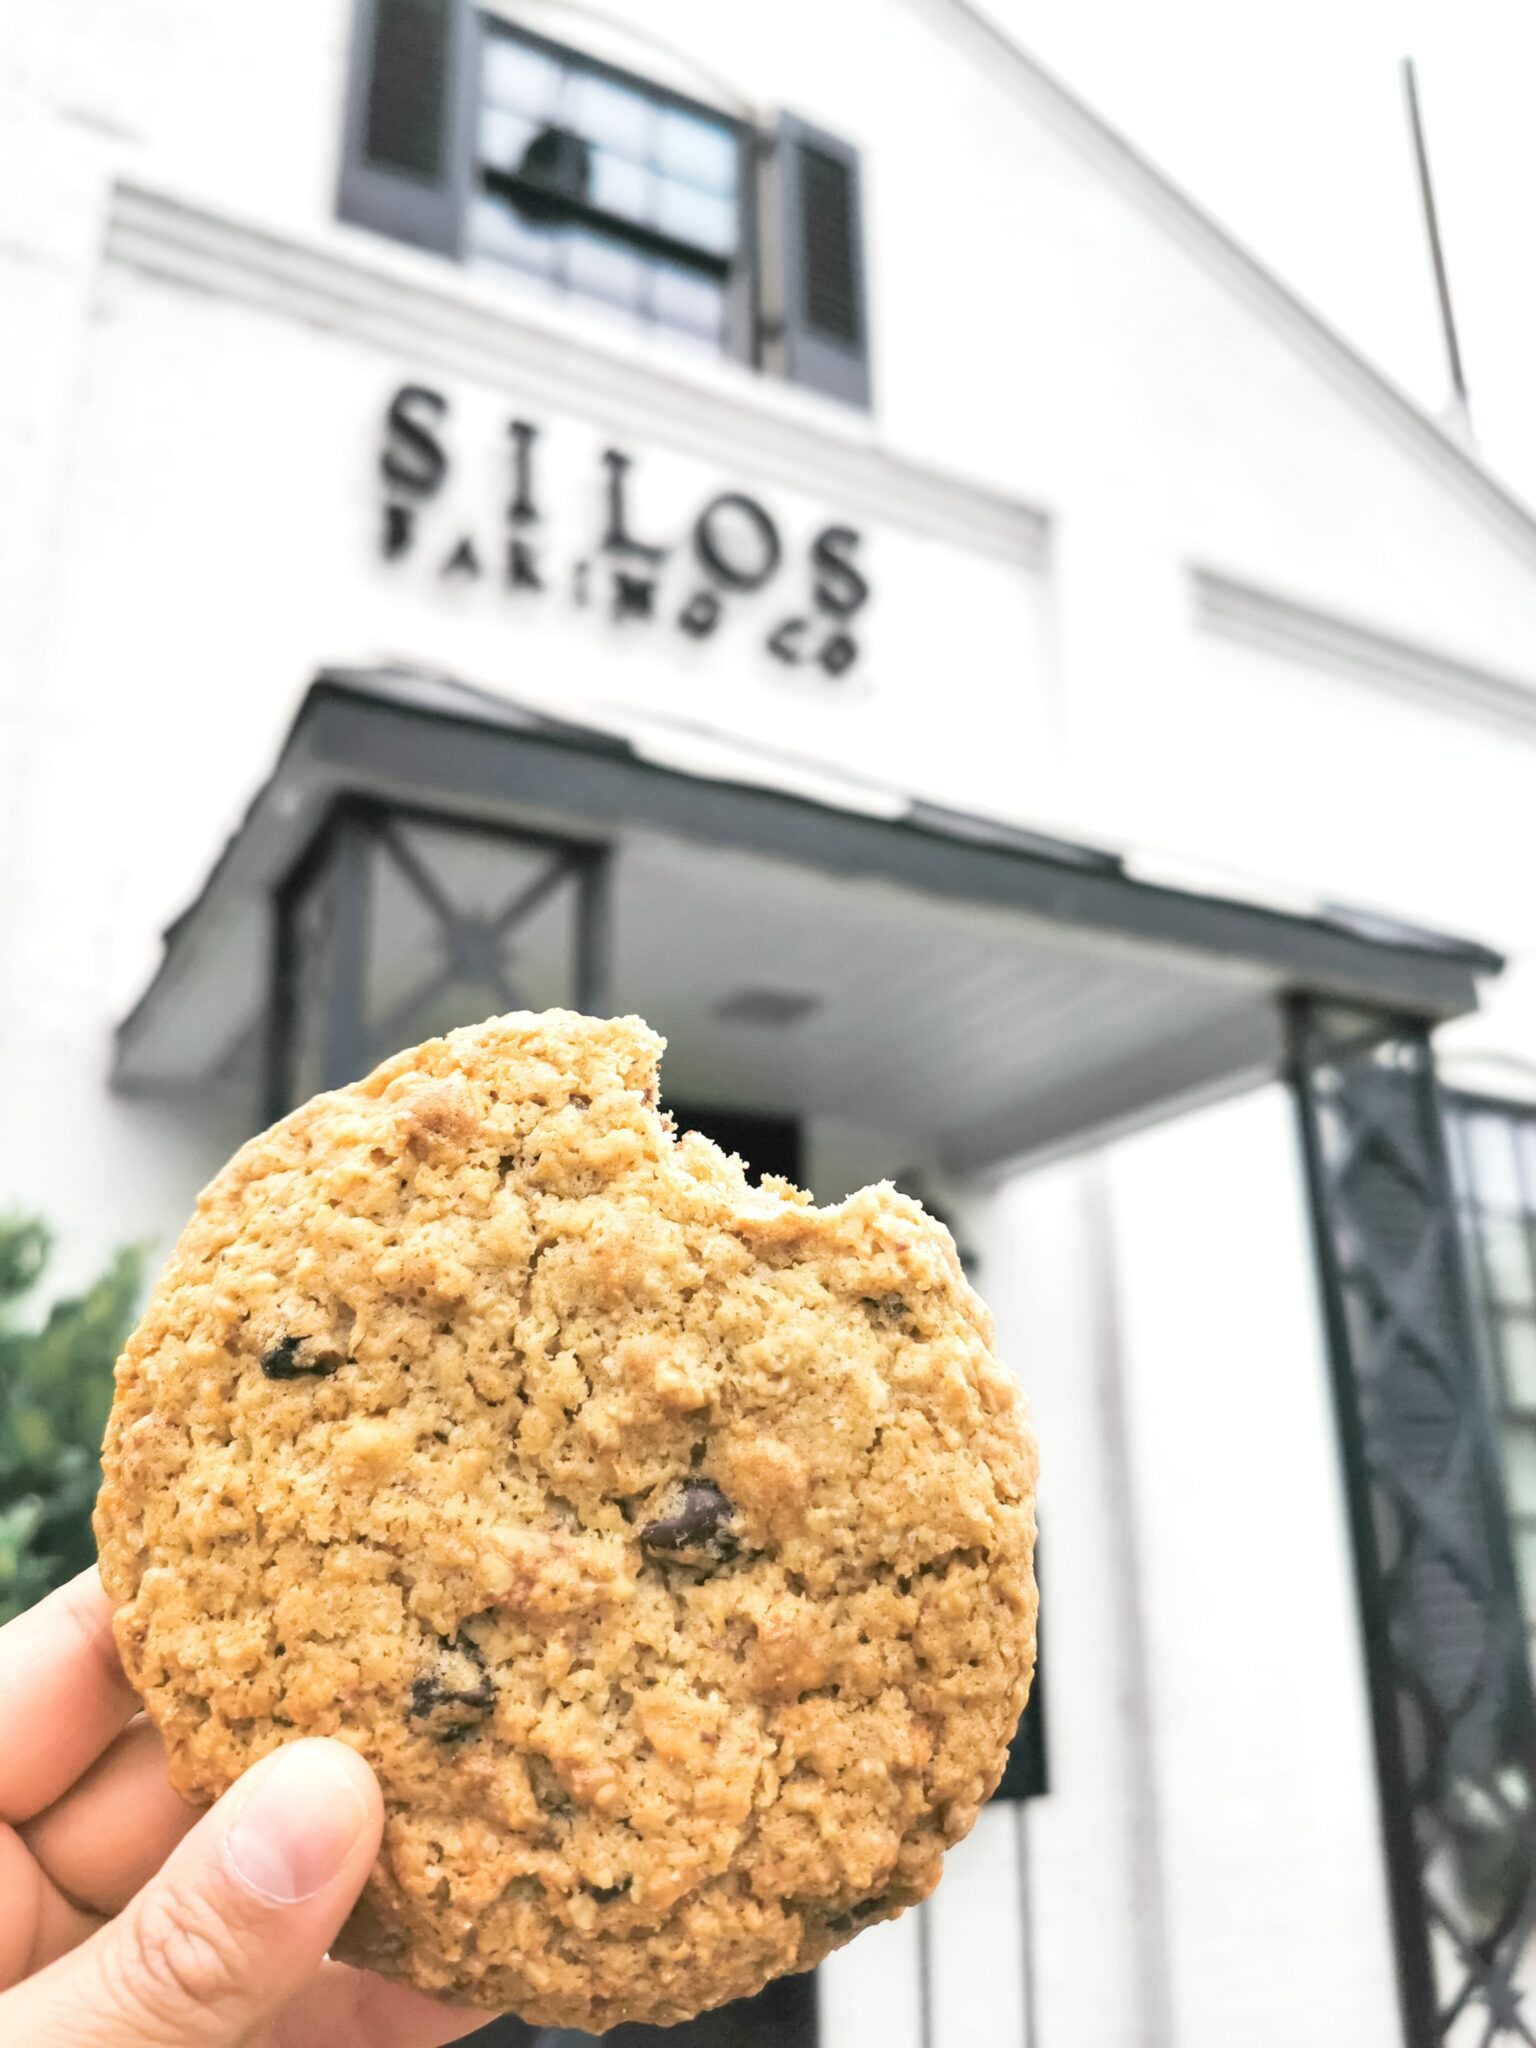 The front entrance of Silos Baking Co. and Nancy's hand while she holds up the Silo Cookie.